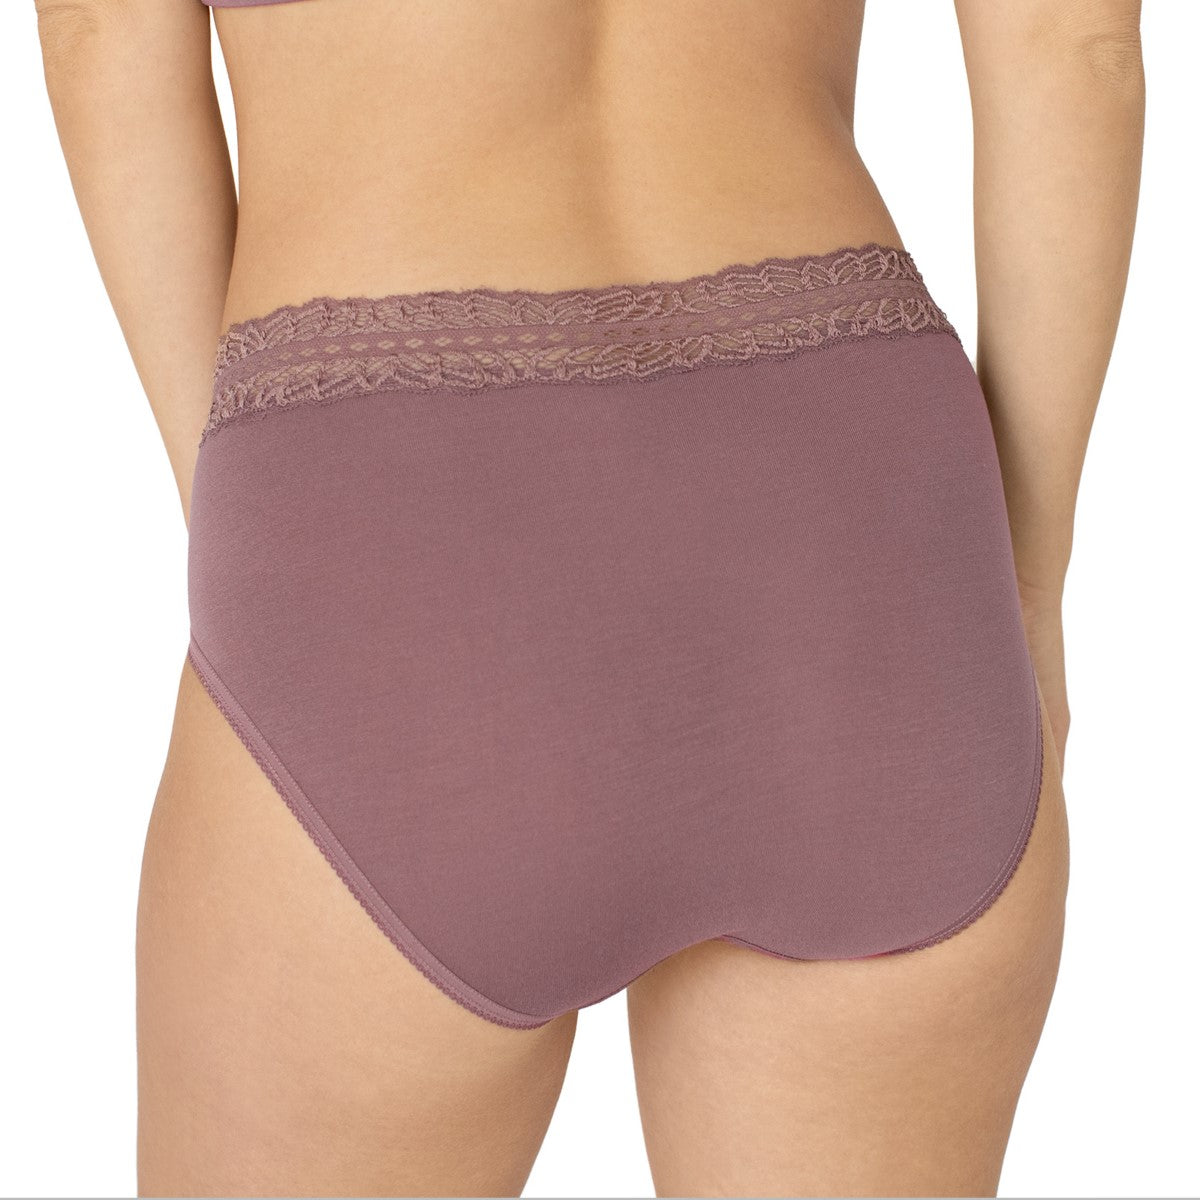 Kindred Bravely High Waisted Postpartum Recovery Panty 5 Pack